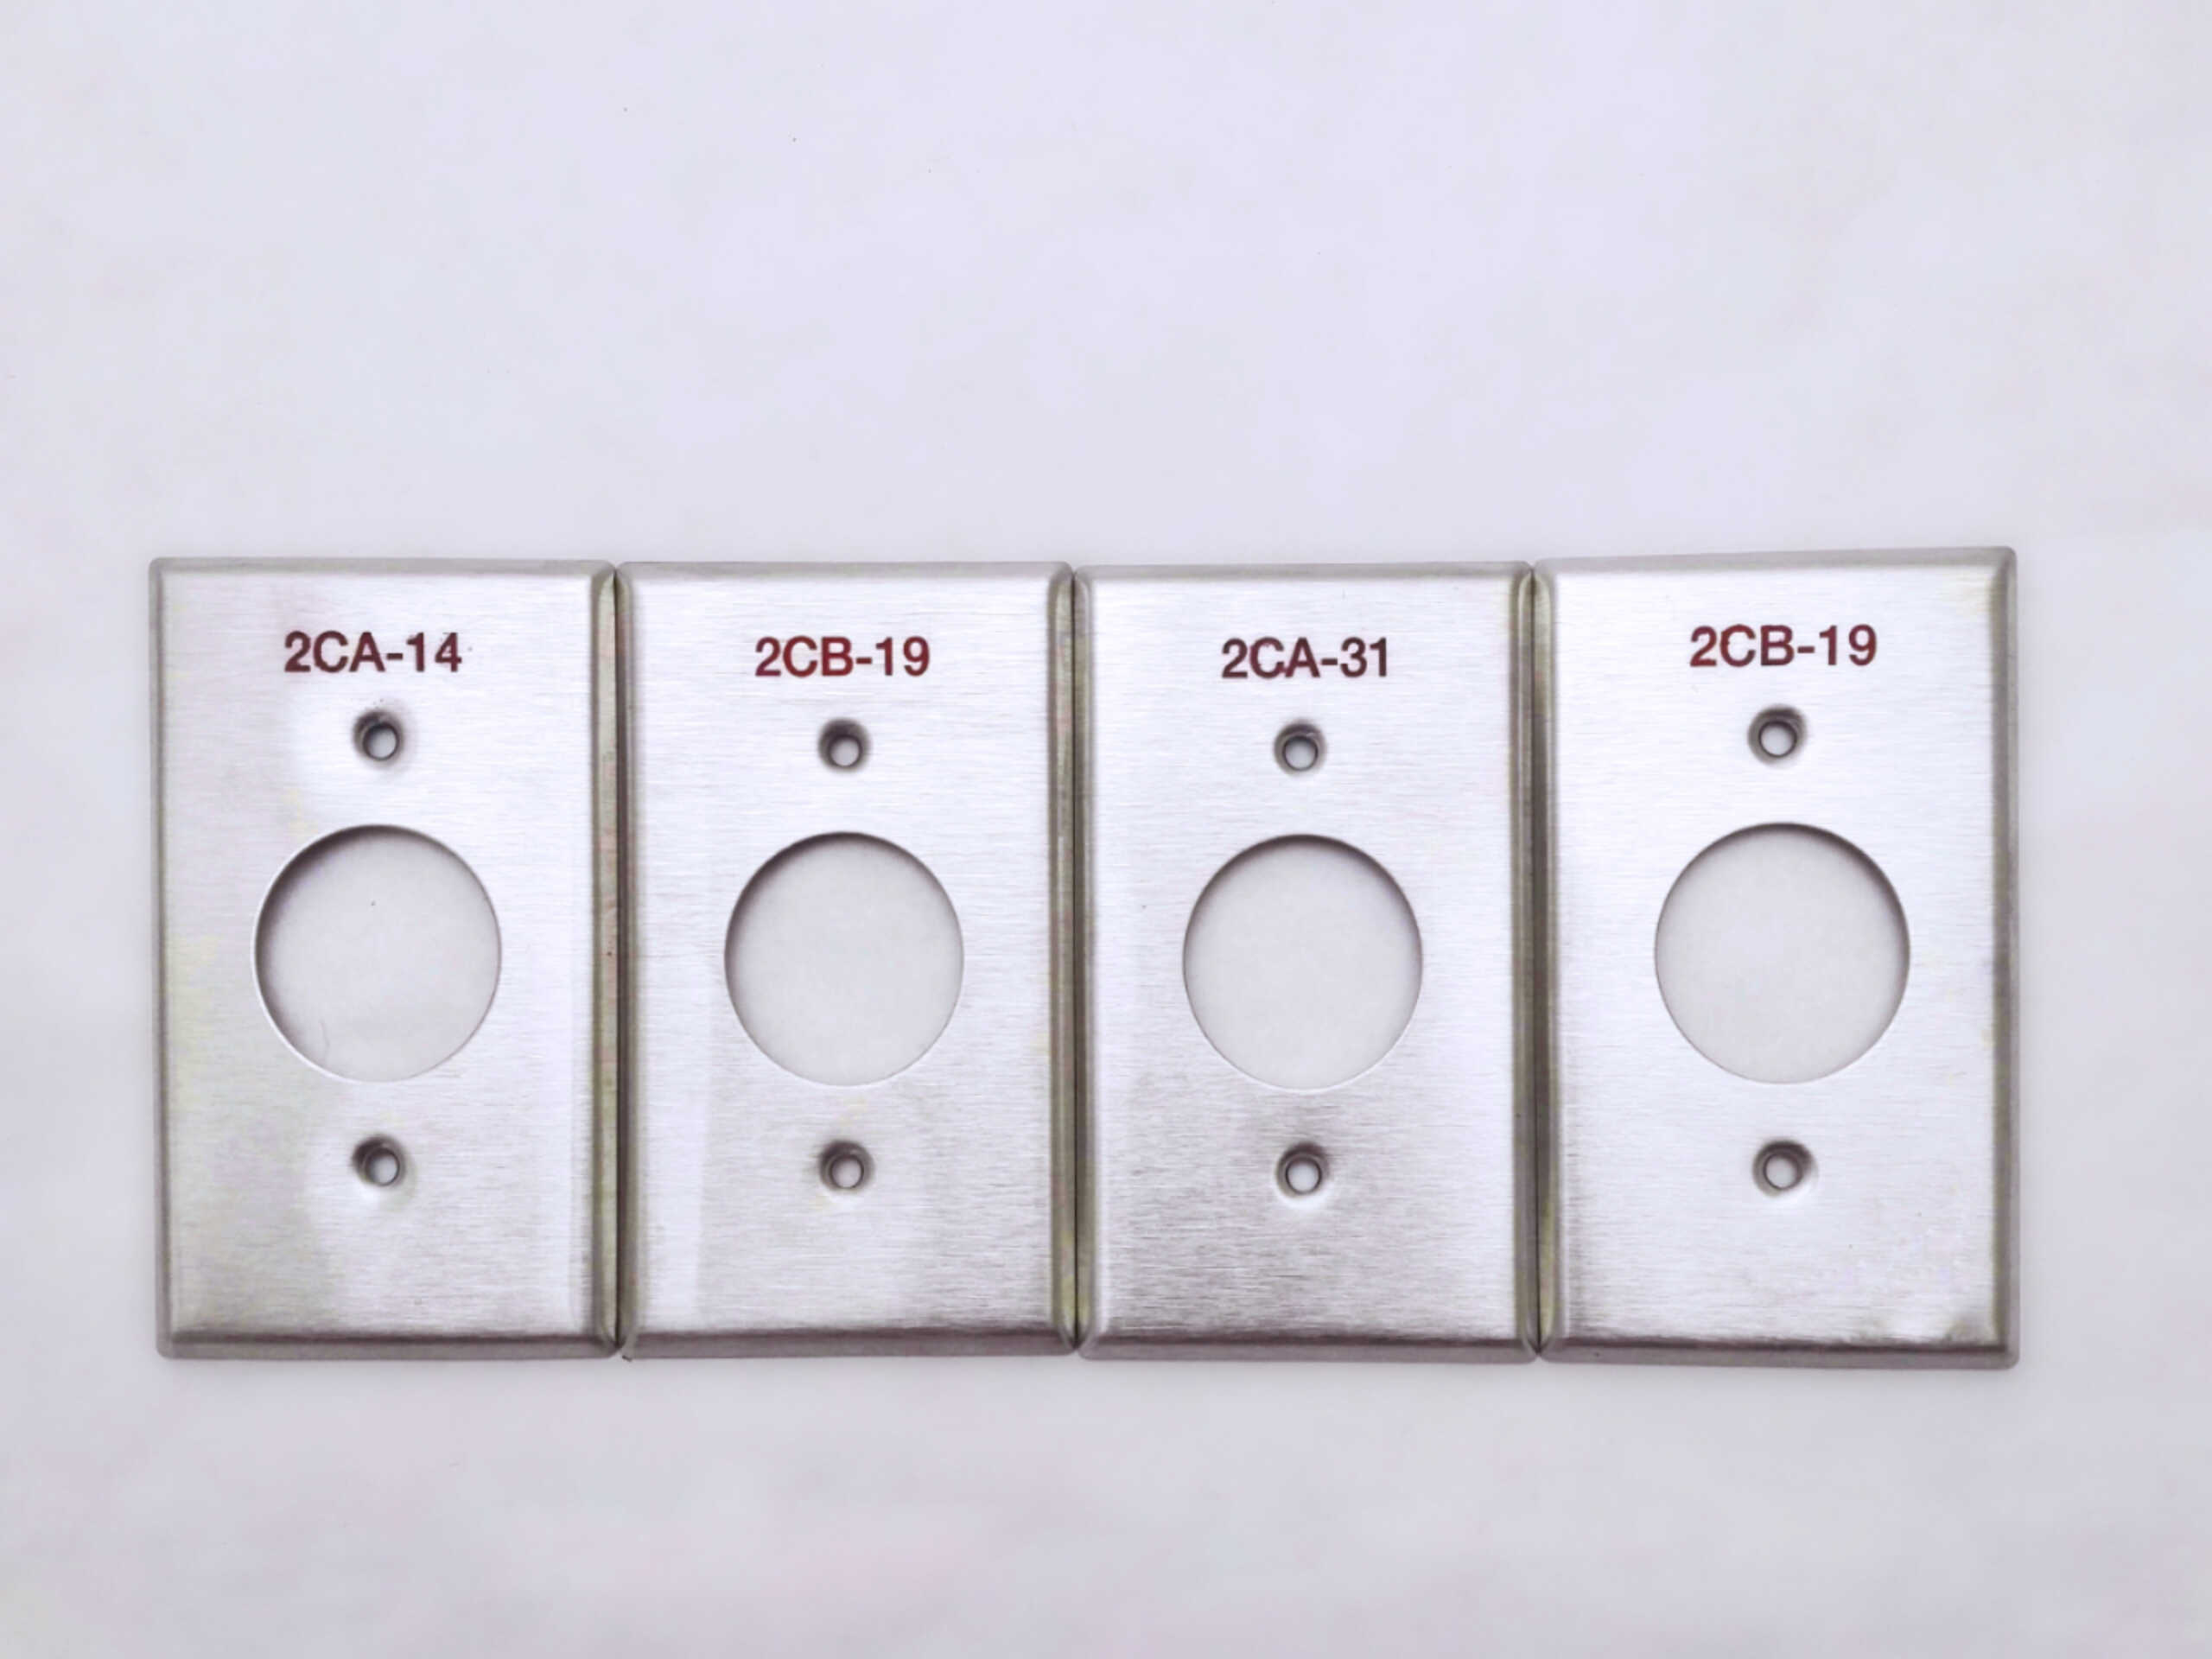 stainless steel custom engraved and paint-filled Switch plate for hospitals, medical centers, federal buildings, universities